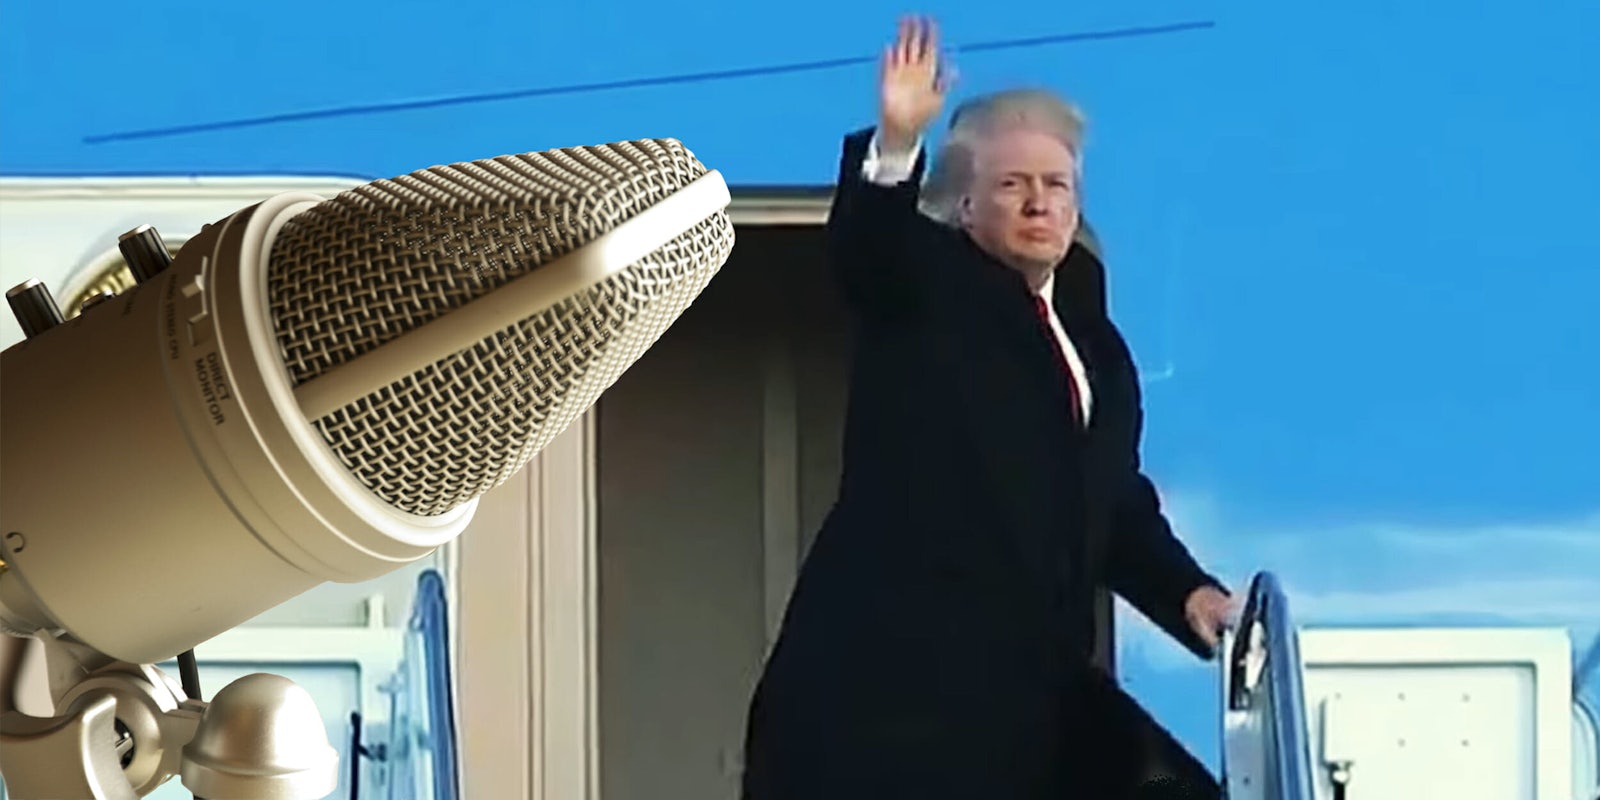 Trump waving from Air Force One